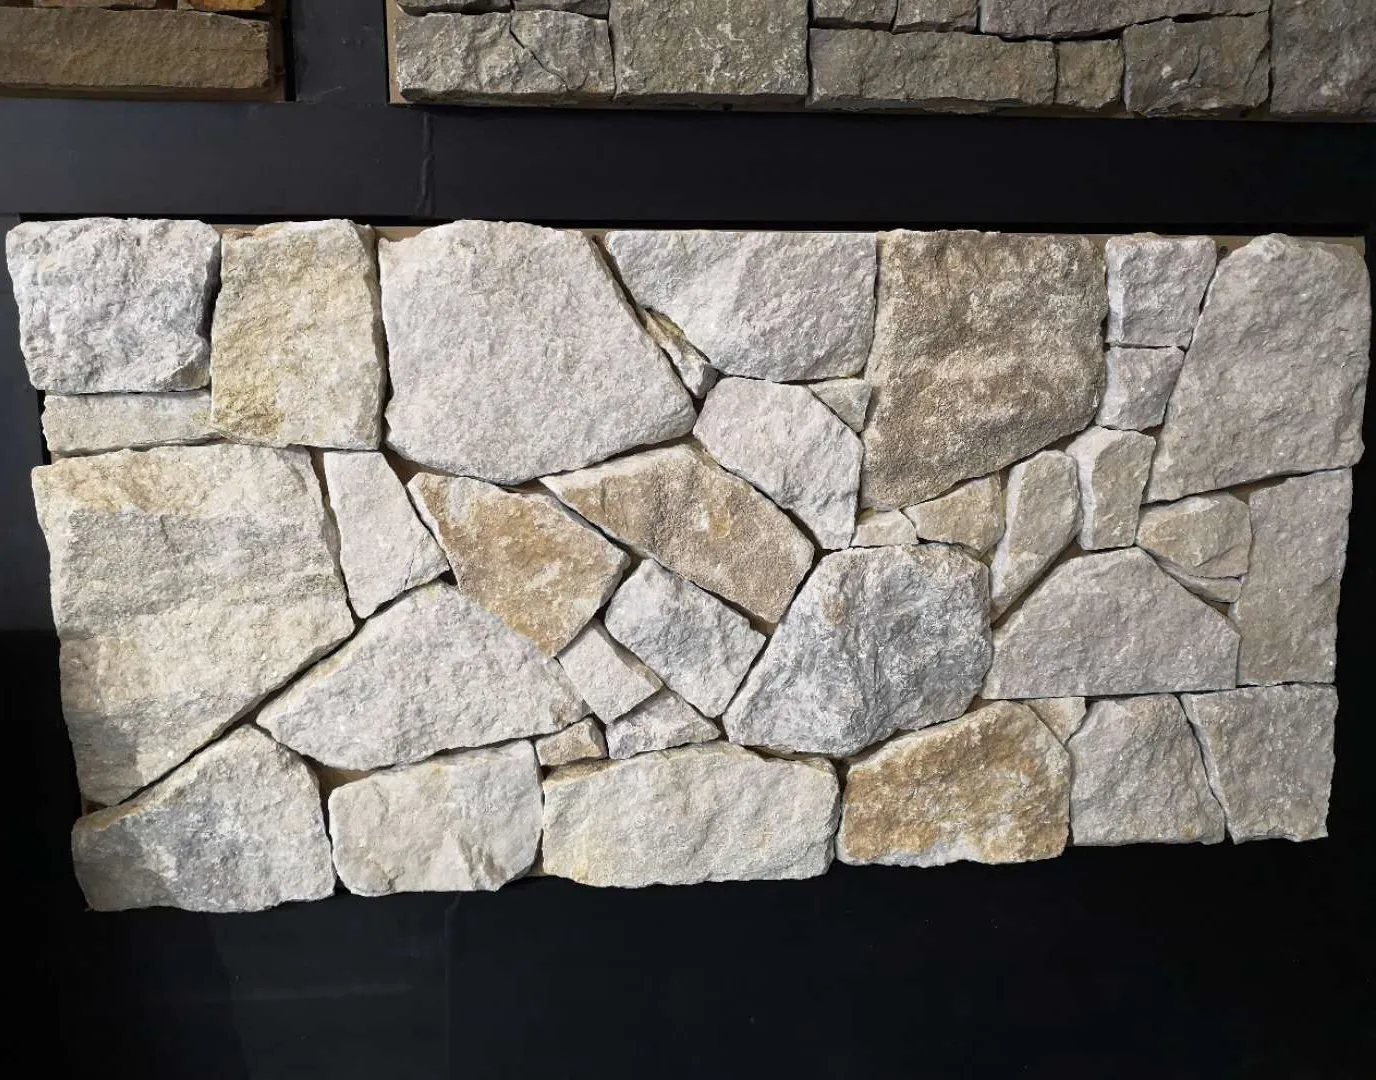 SHIHUI Wholesale Price Buff Quartzite Dry Stack Stone Veneer Natural Exterior Stone Wall Cladding Outdoor Stone for Walls